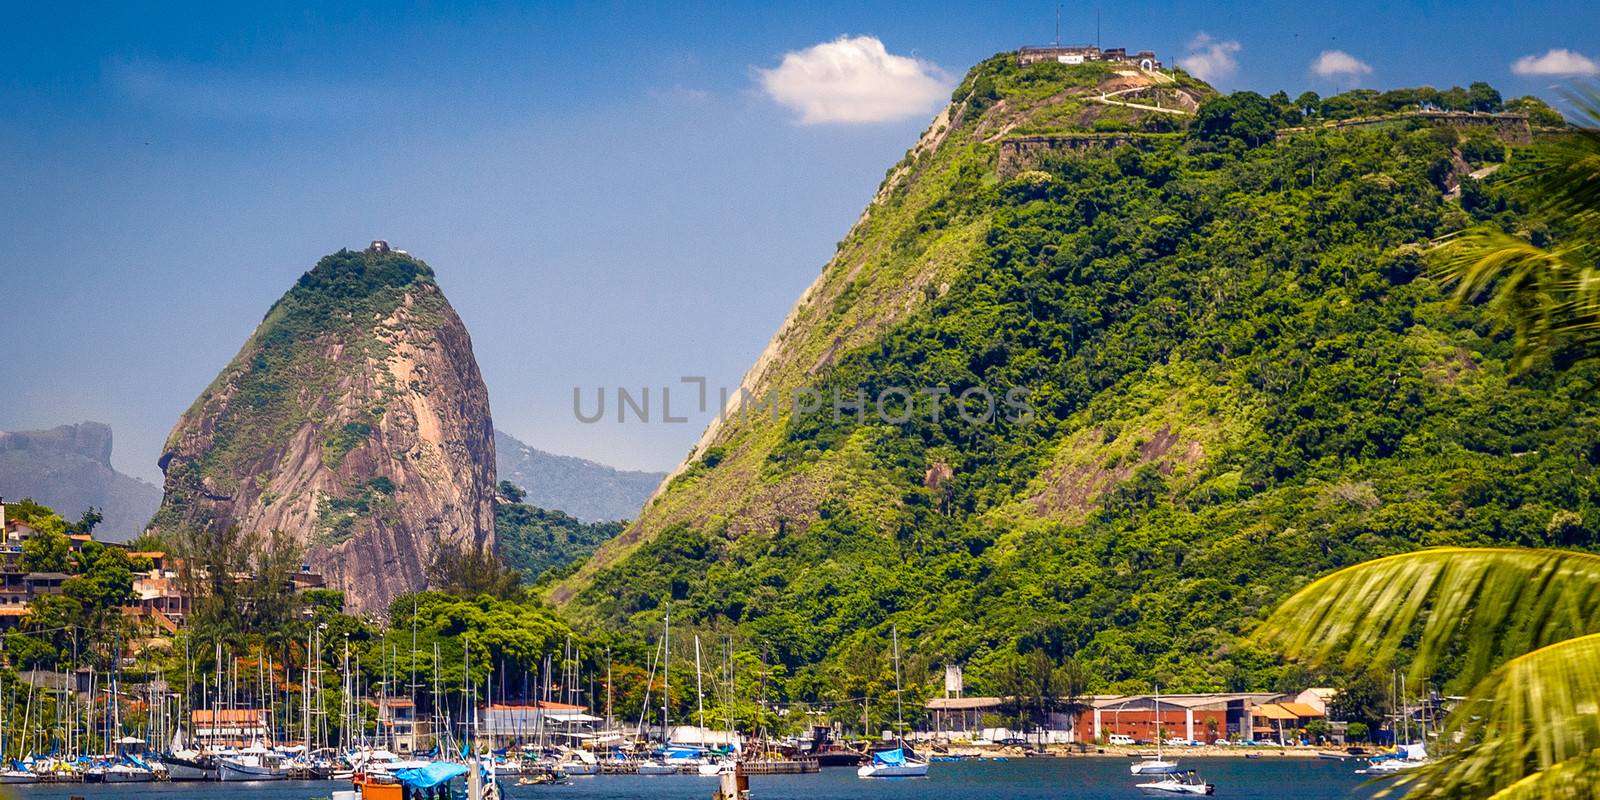 Boats at a harbor with Sugarloaf Mountain in the background, Guanabara Bay, Rio de Janeiro, Brazil